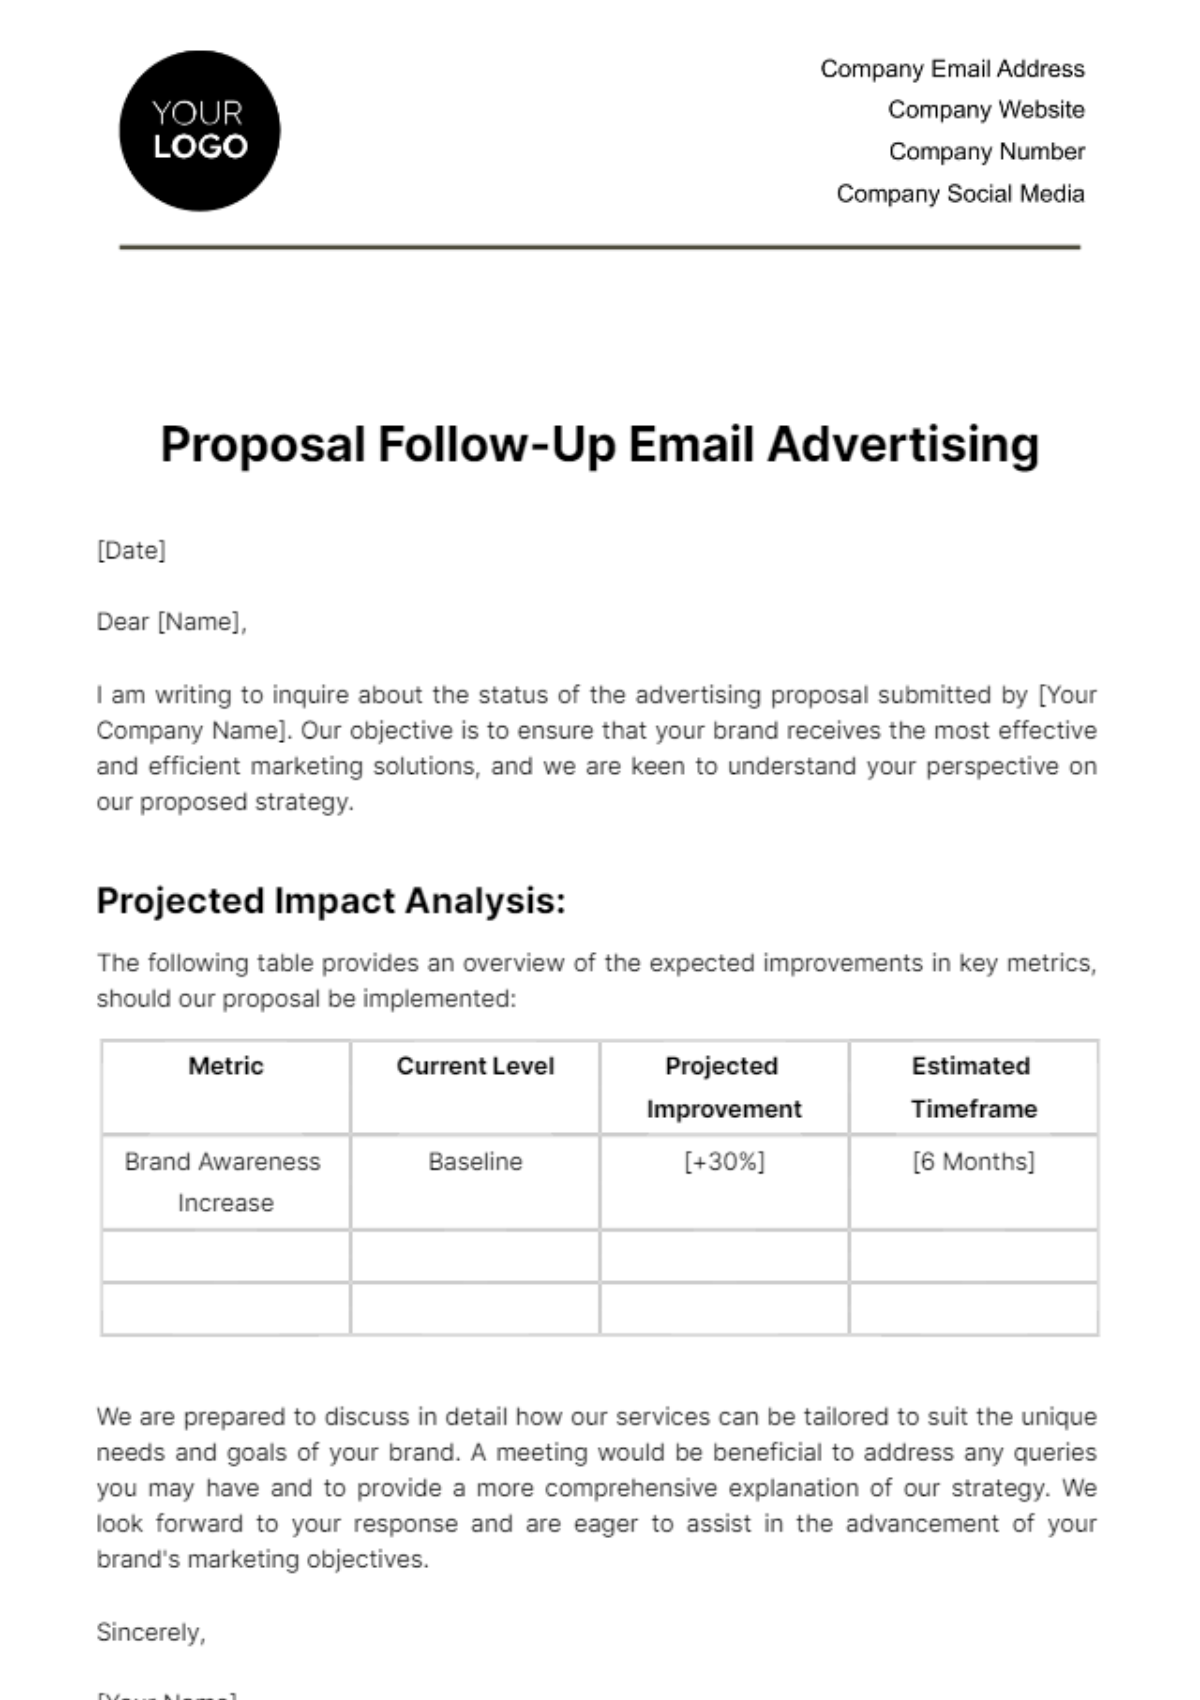 Proposal Follow-Up Email Advertising Template